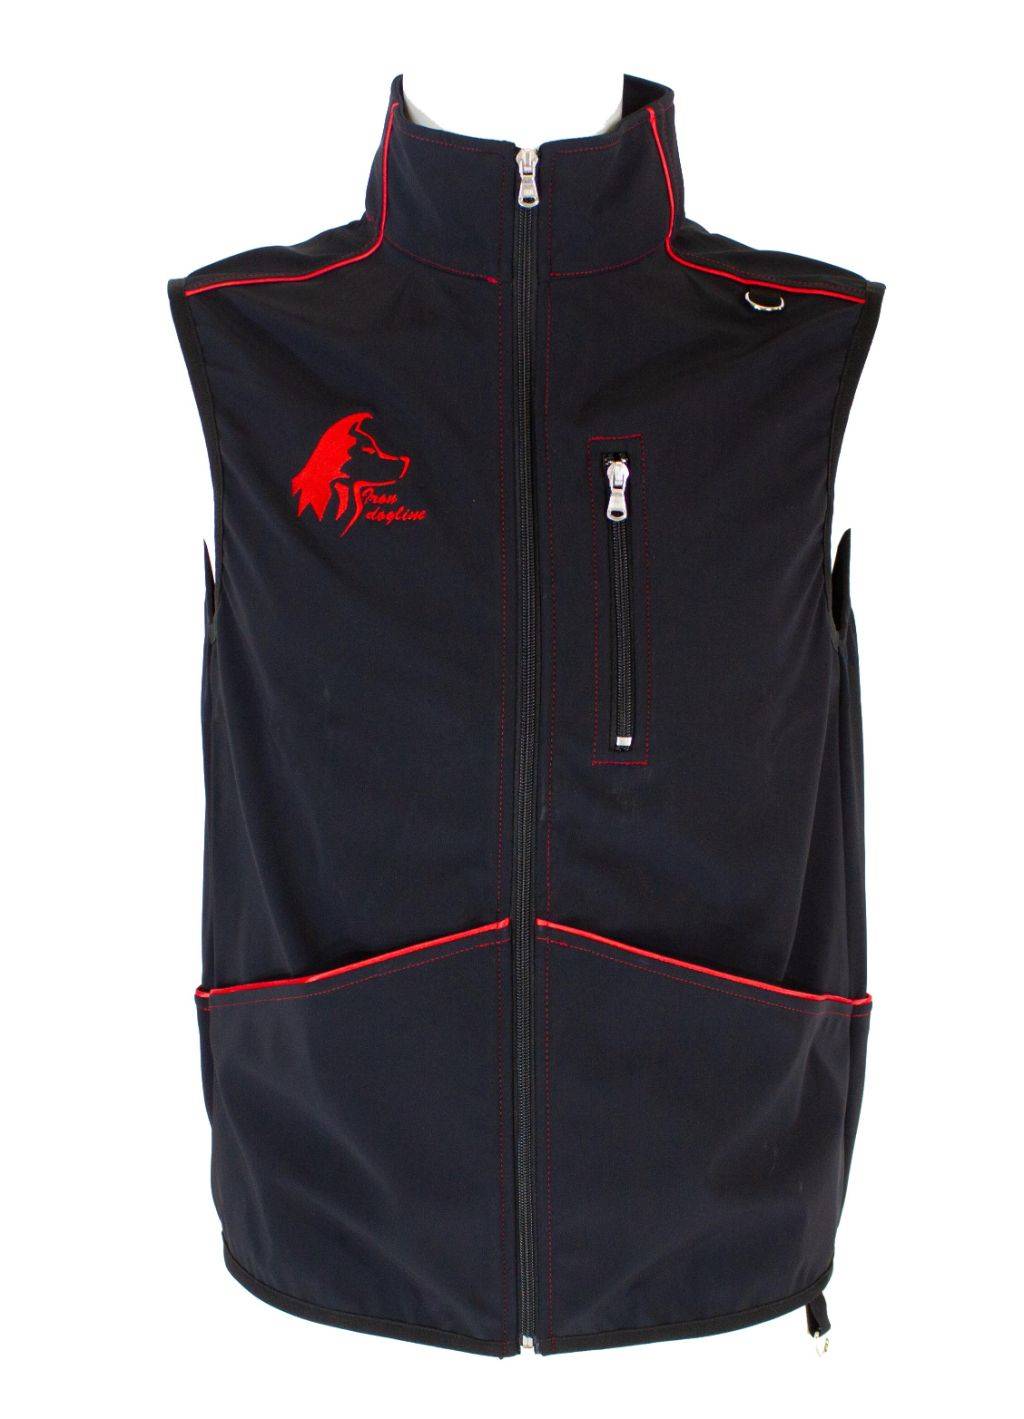 GILET ADDESTRAMENTO INVERNALE unisex Made In Italy